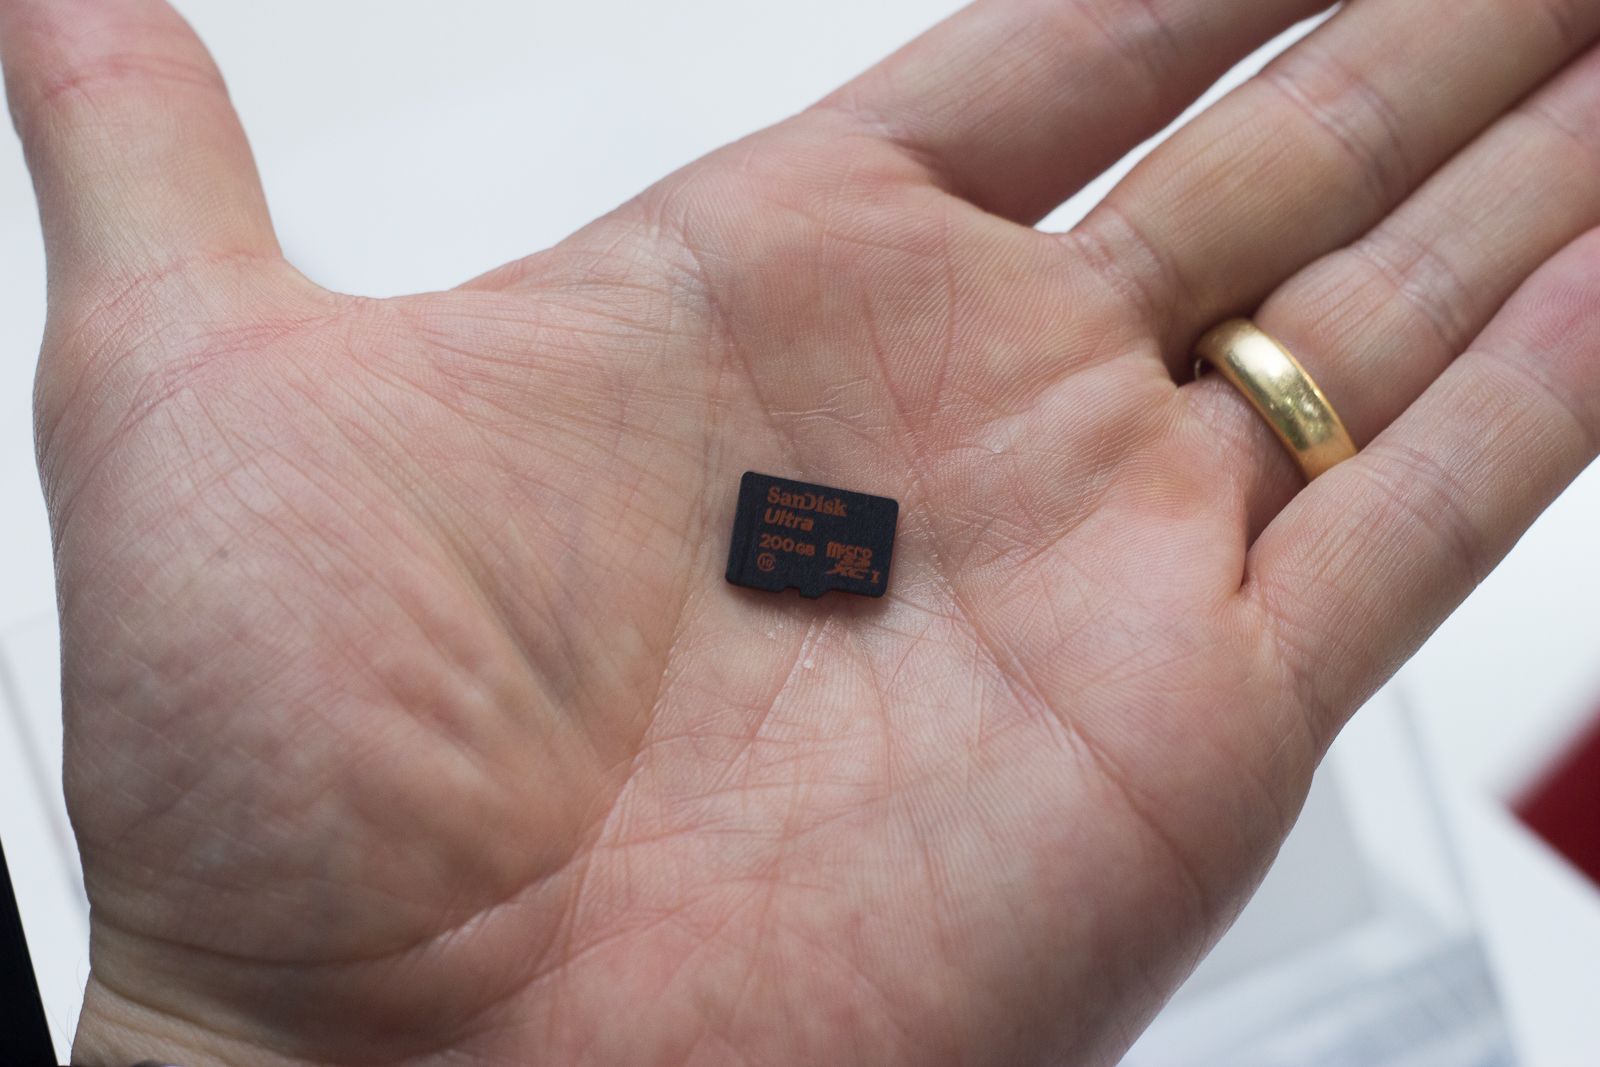 wow 200gb microsd card stores more data than an iphone and is smaller than a 1p coin image 1